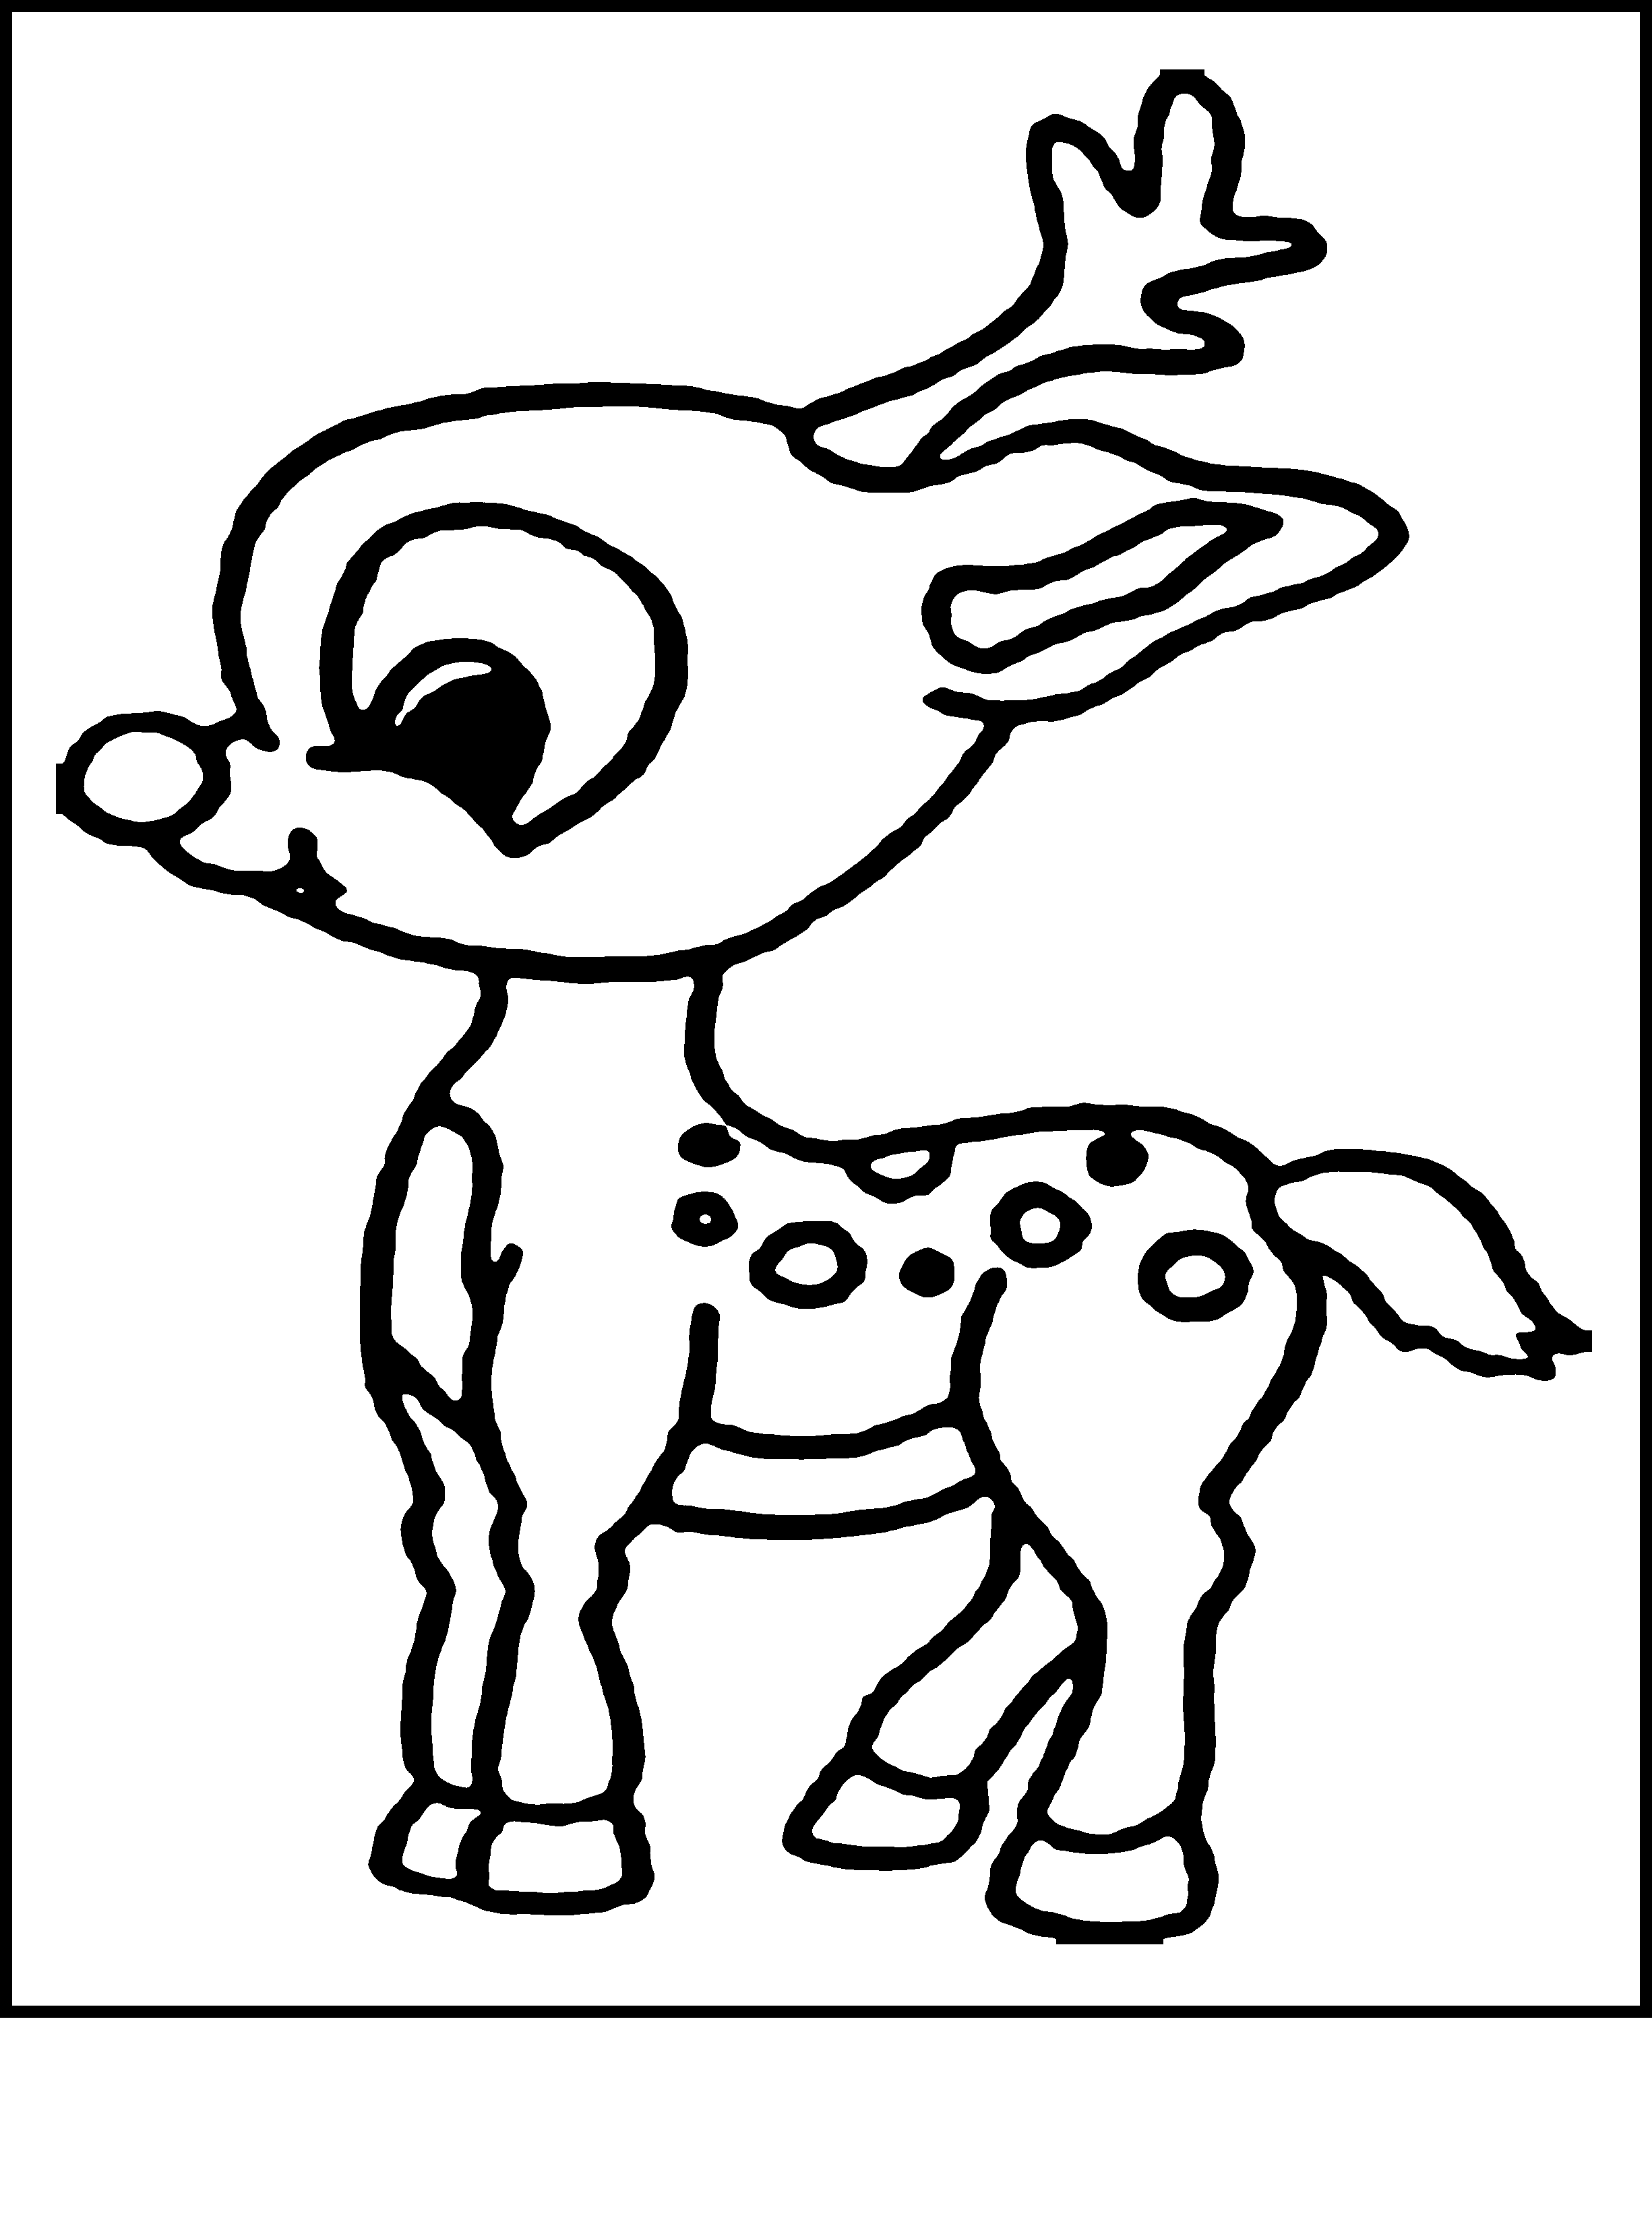 Rudolph Coloring Pages Freely | Educative Printable